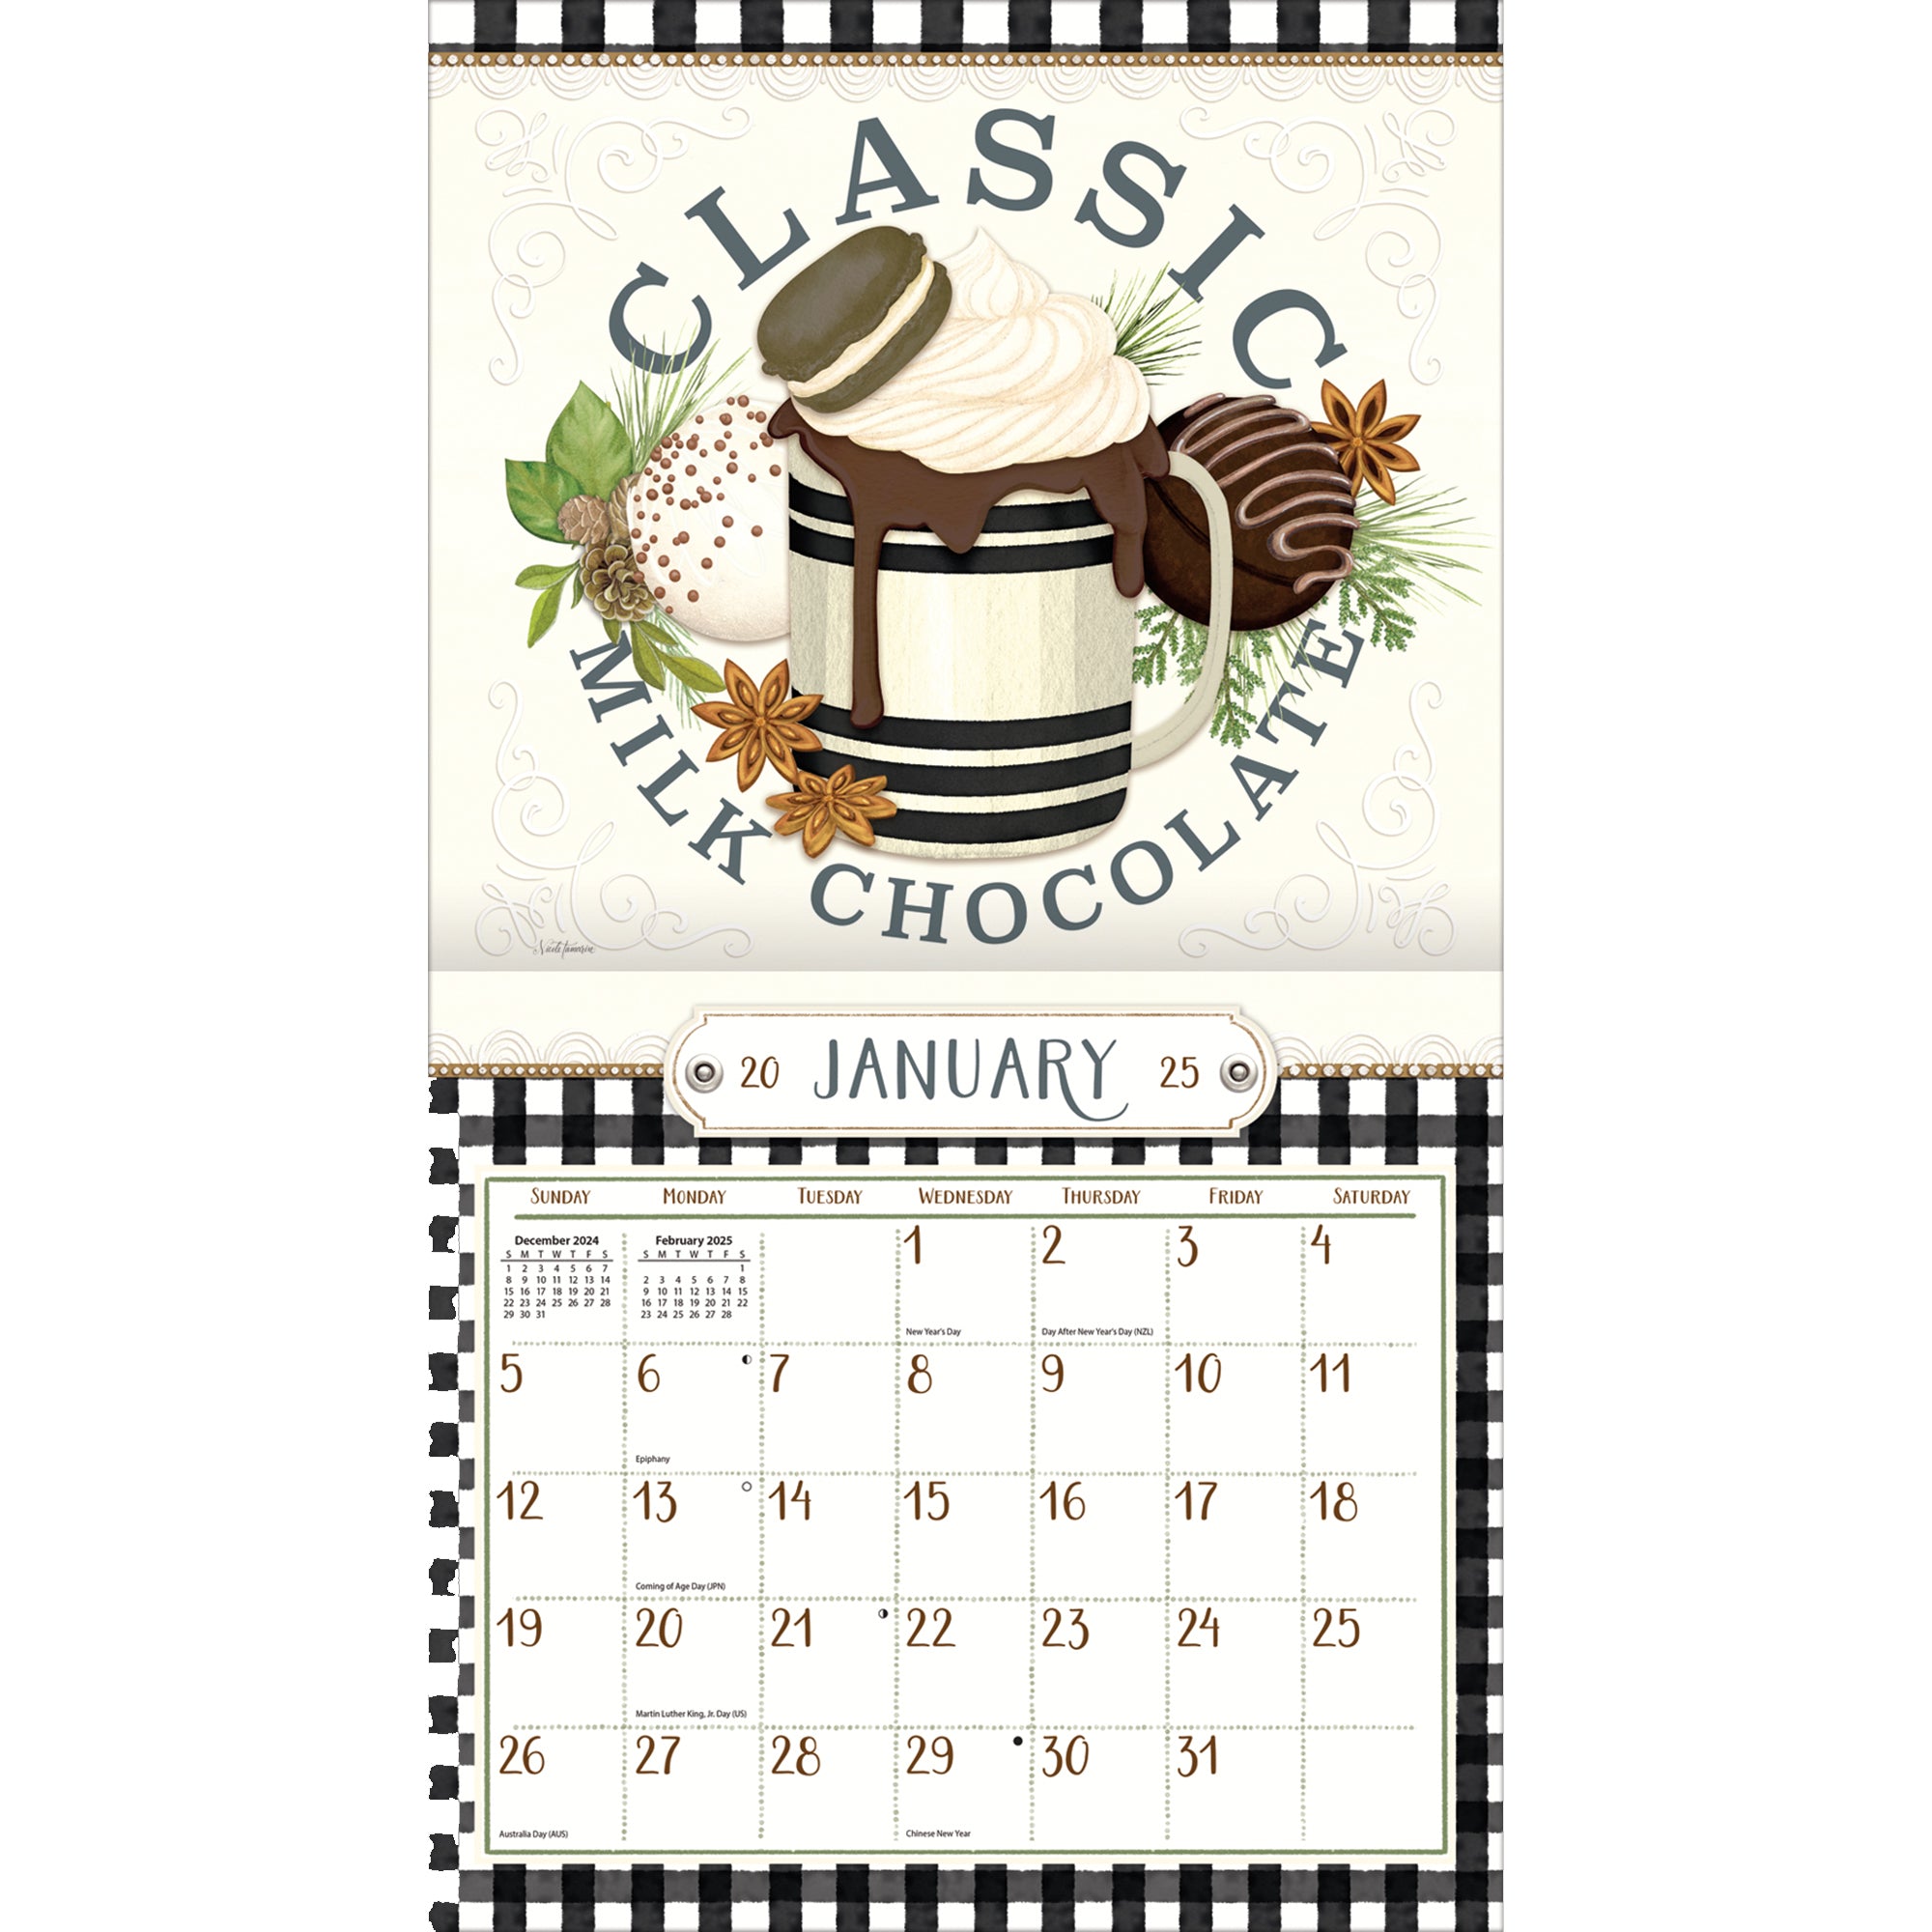 2025 Love To Cook By Nicole Tamarin - LANG Deluxe Wall Calendar